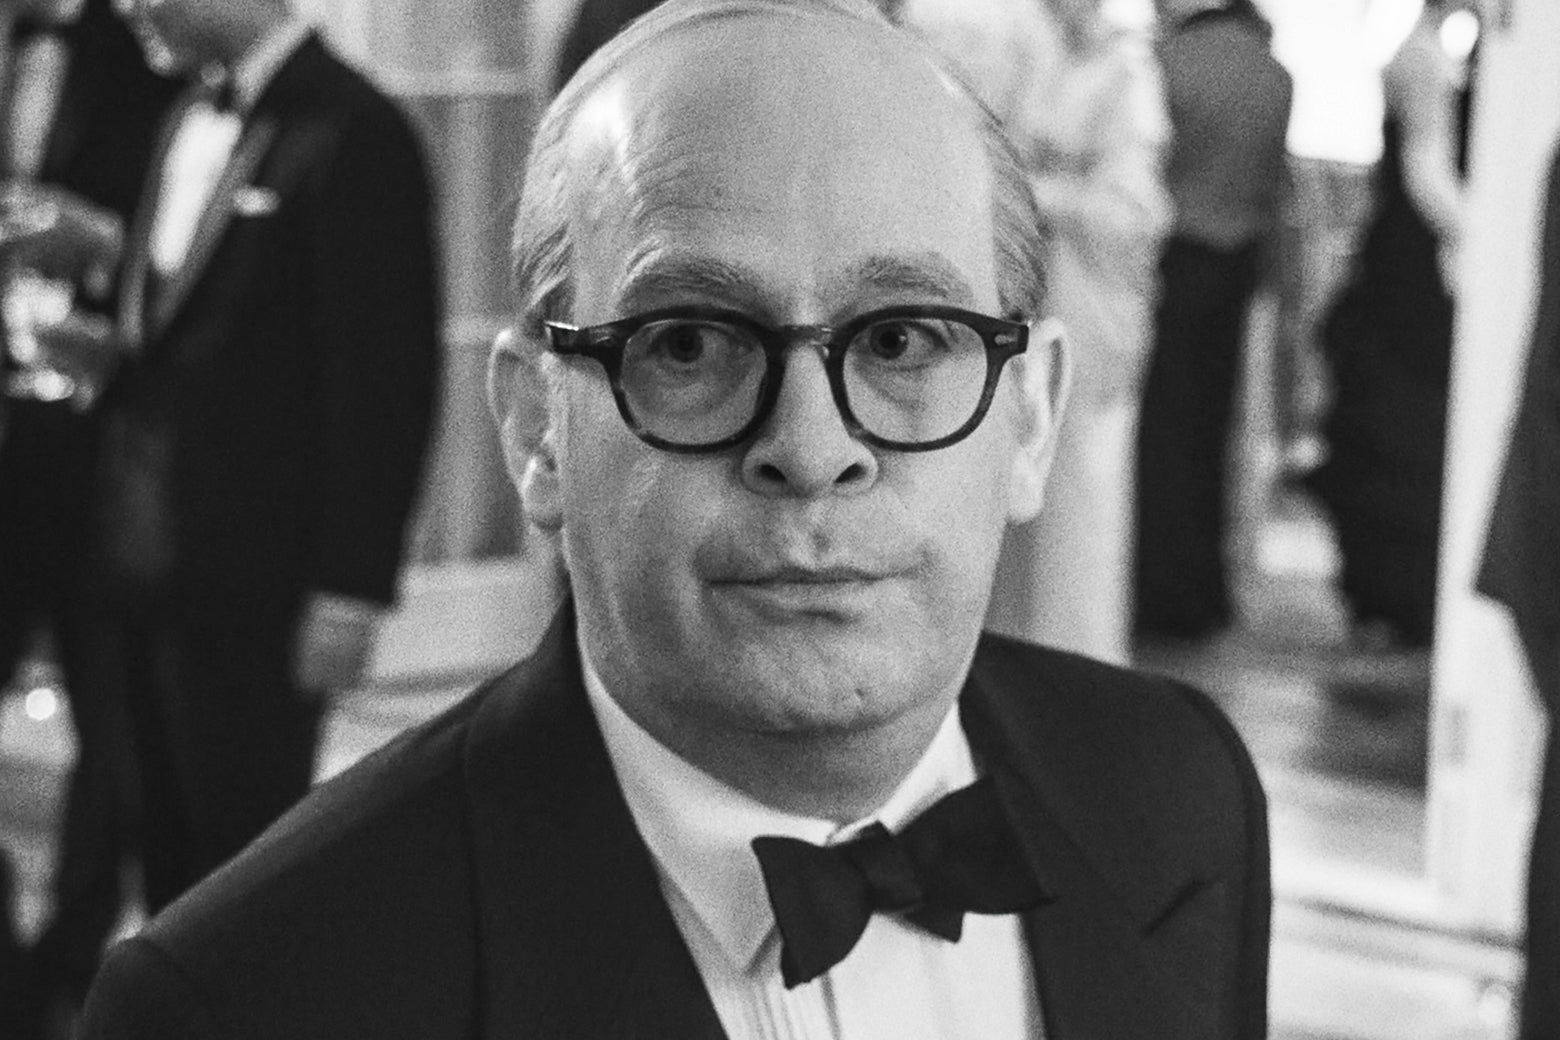 Tom Hollander as Truman Capote, wearing glasses and a tuxedo, in black and white.